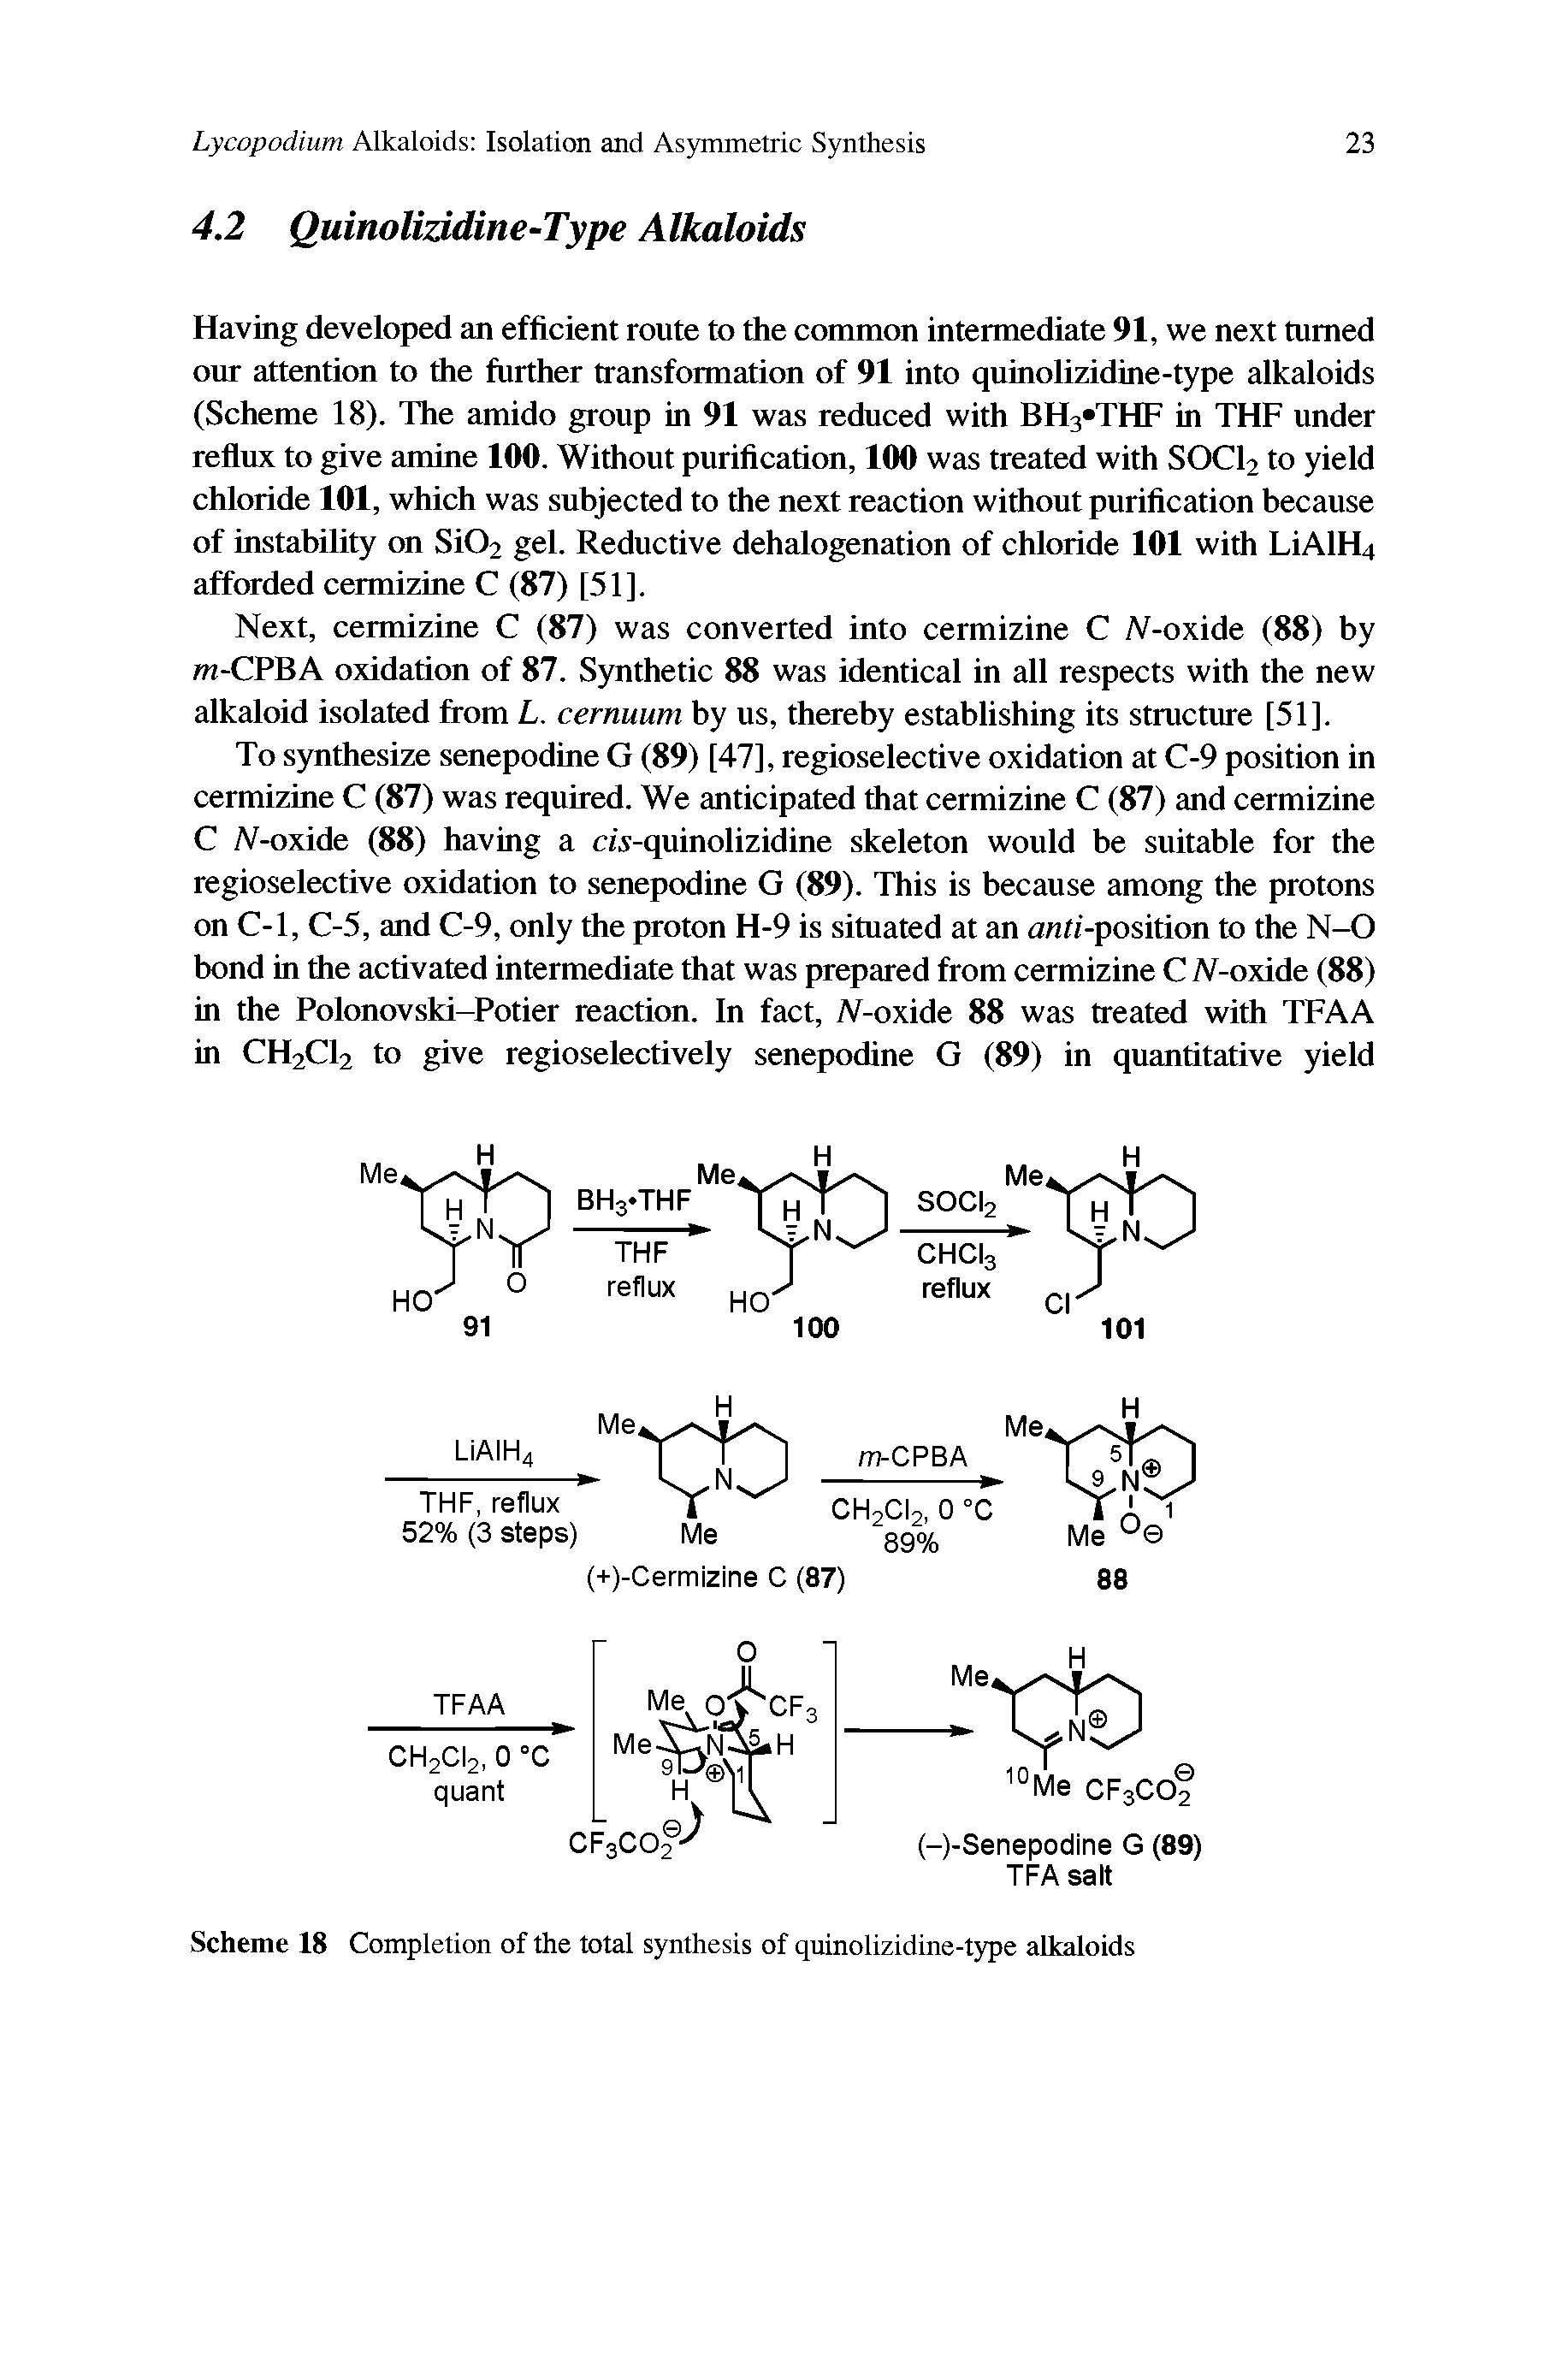 Scheme 18 Completion of the total synthesis of quinolizidine-type alkaloids...